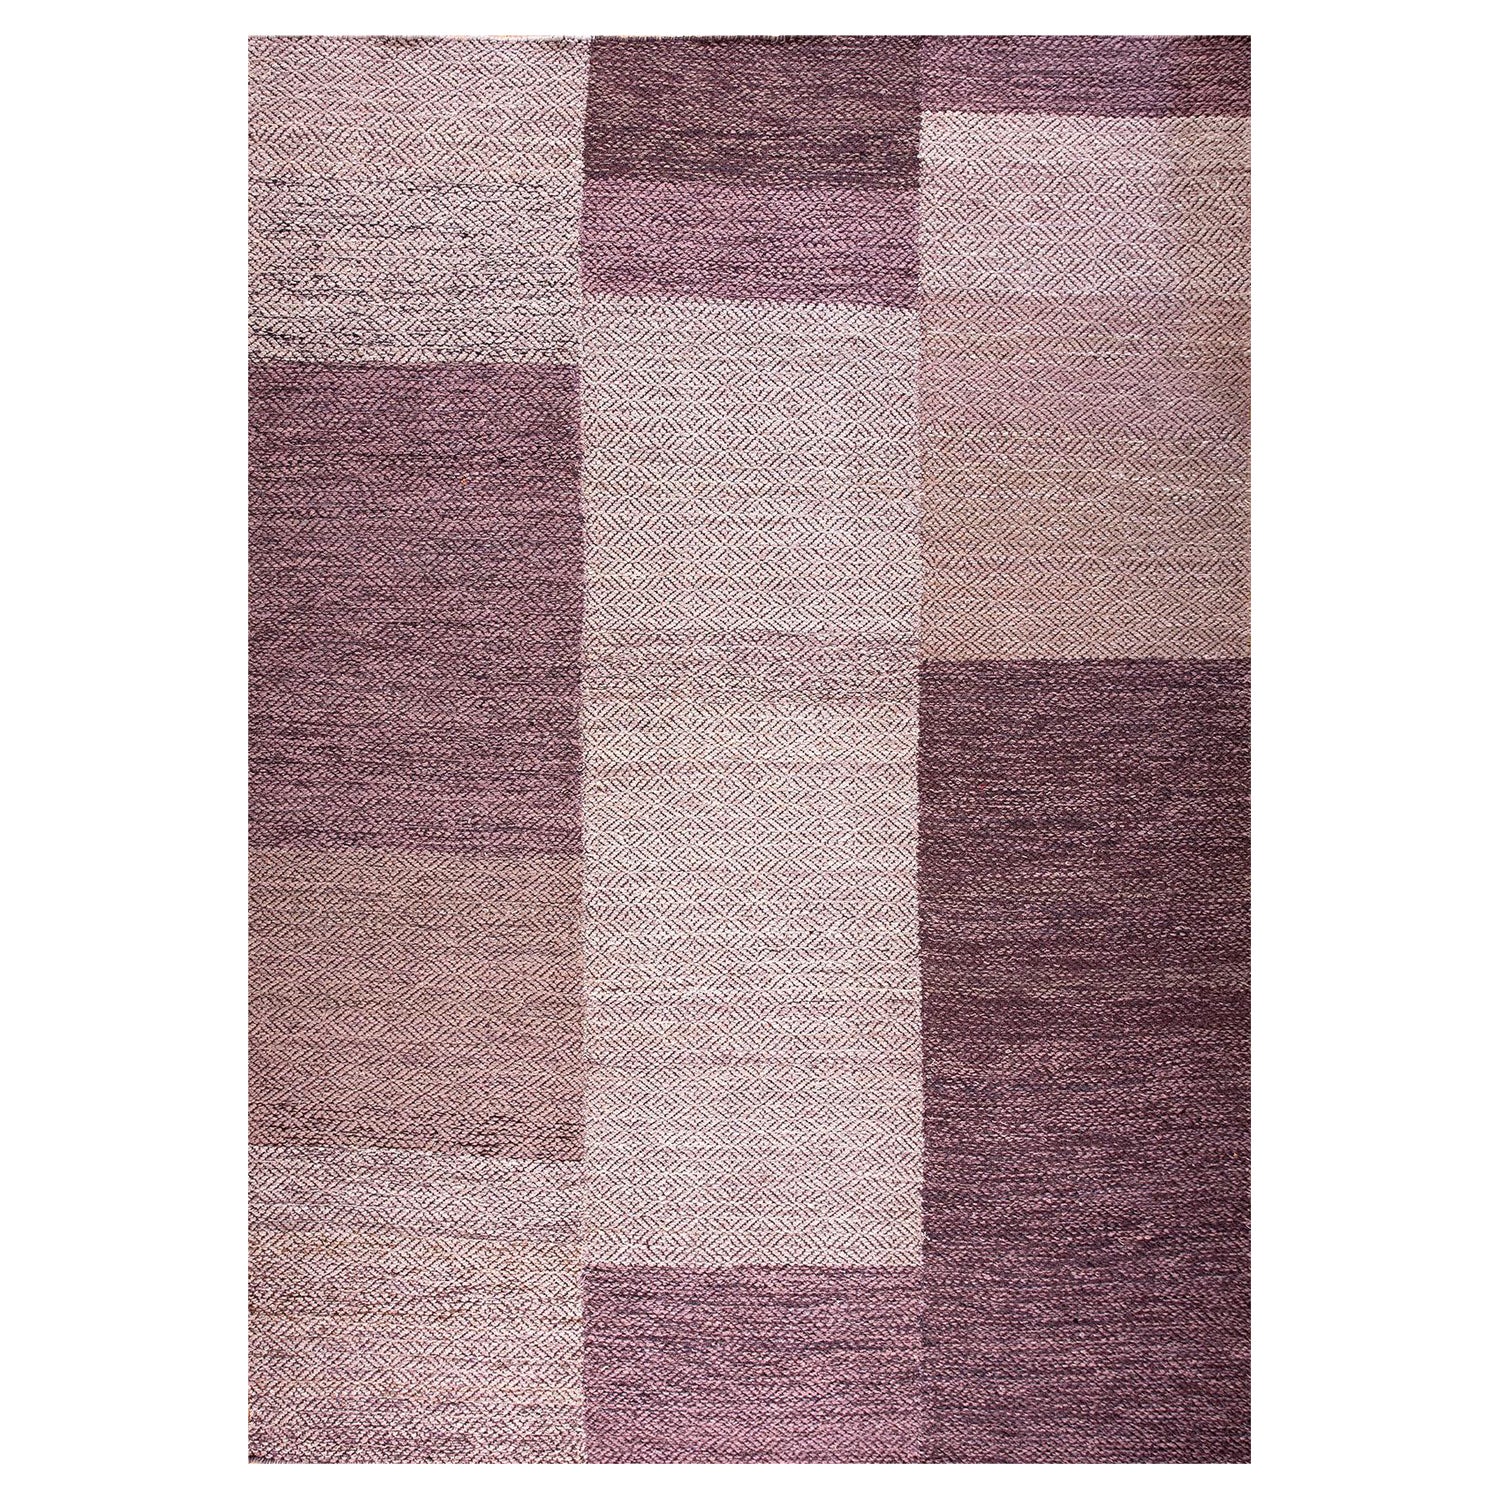 Contemporary Handwoven Wool Shaker Style Flat Weave Carpet 9' 0" x 12' 3" For Sale